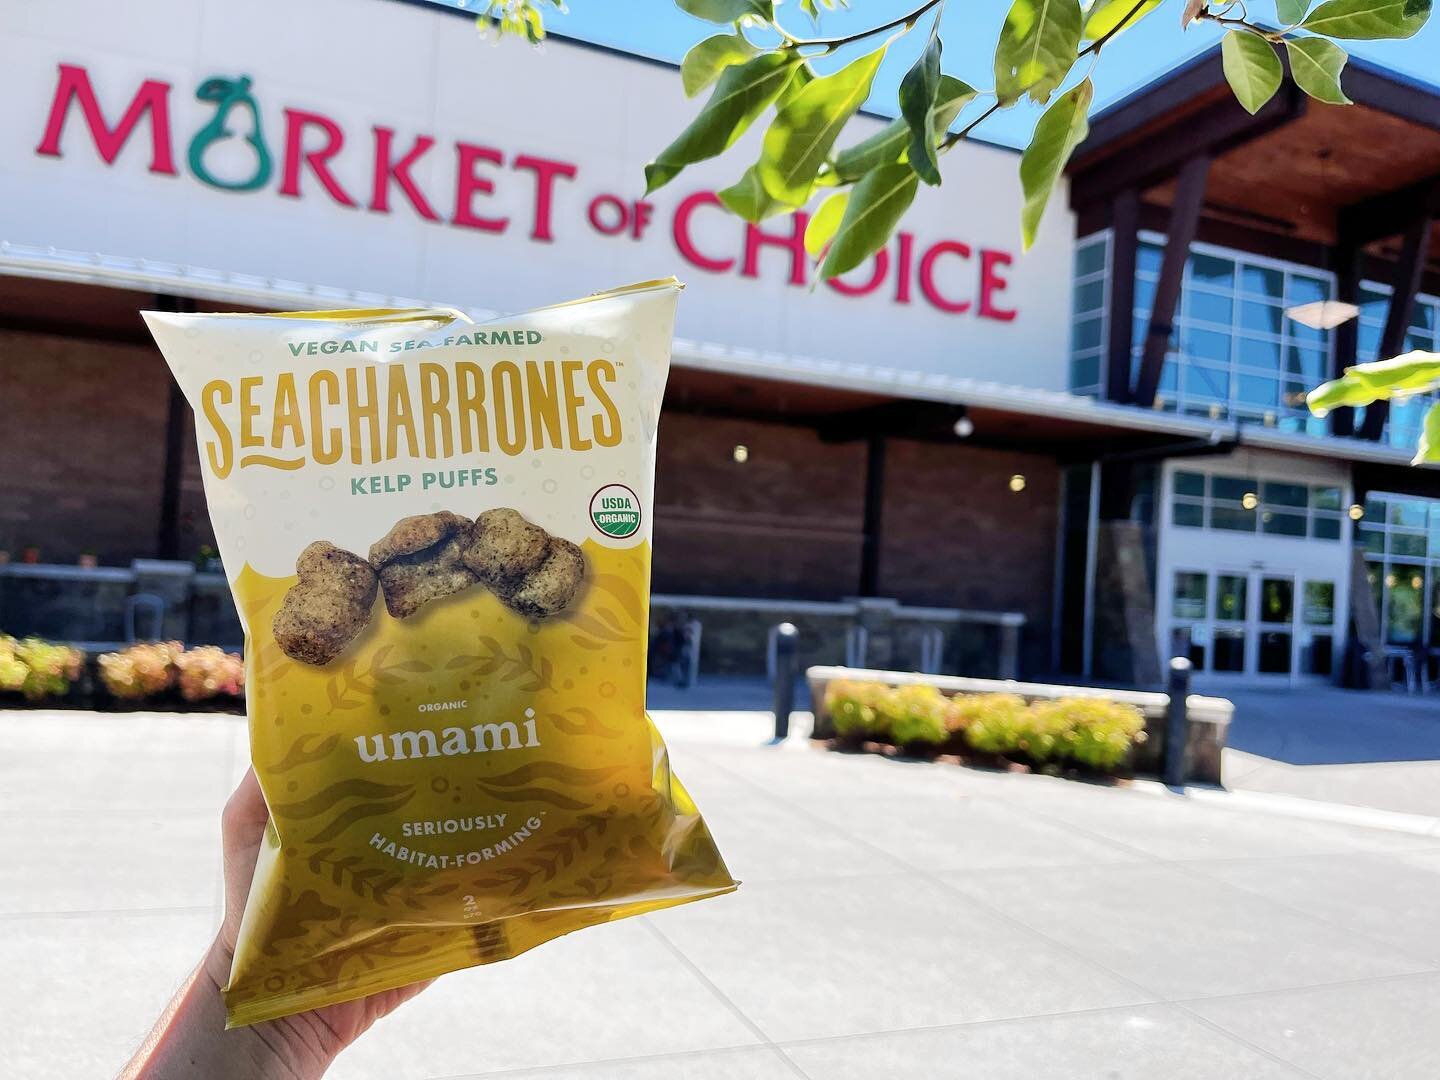 We&rsquo;re KELPing with excitement! 😆 You can now snag all three Seacharrones varieties at all ELEVEN Market of Choice stores throughout the great state of Oregon. 🎉 @marketofchoice